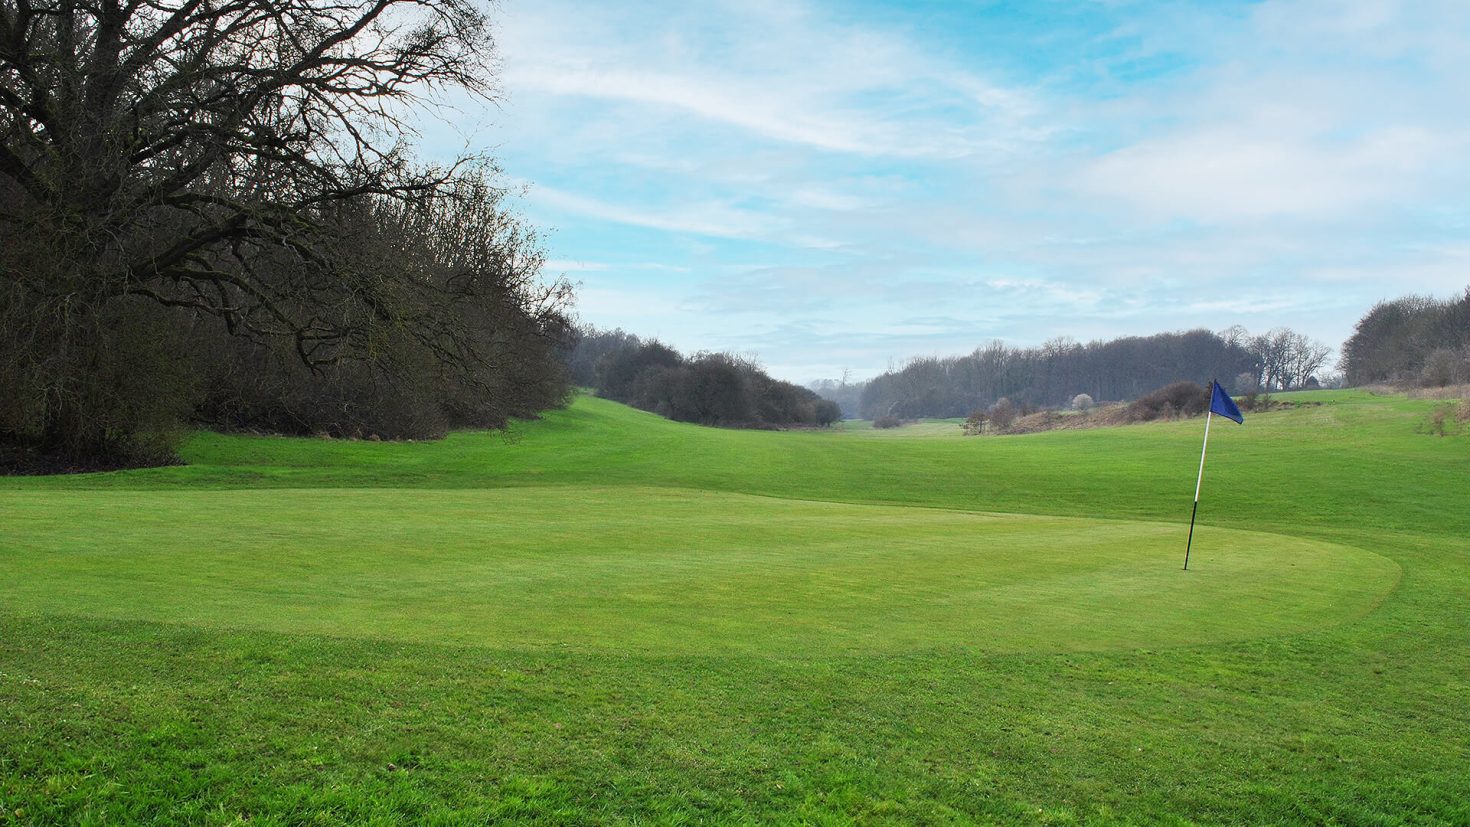 Lullingstone Golf Course - Valley Course Hole 5